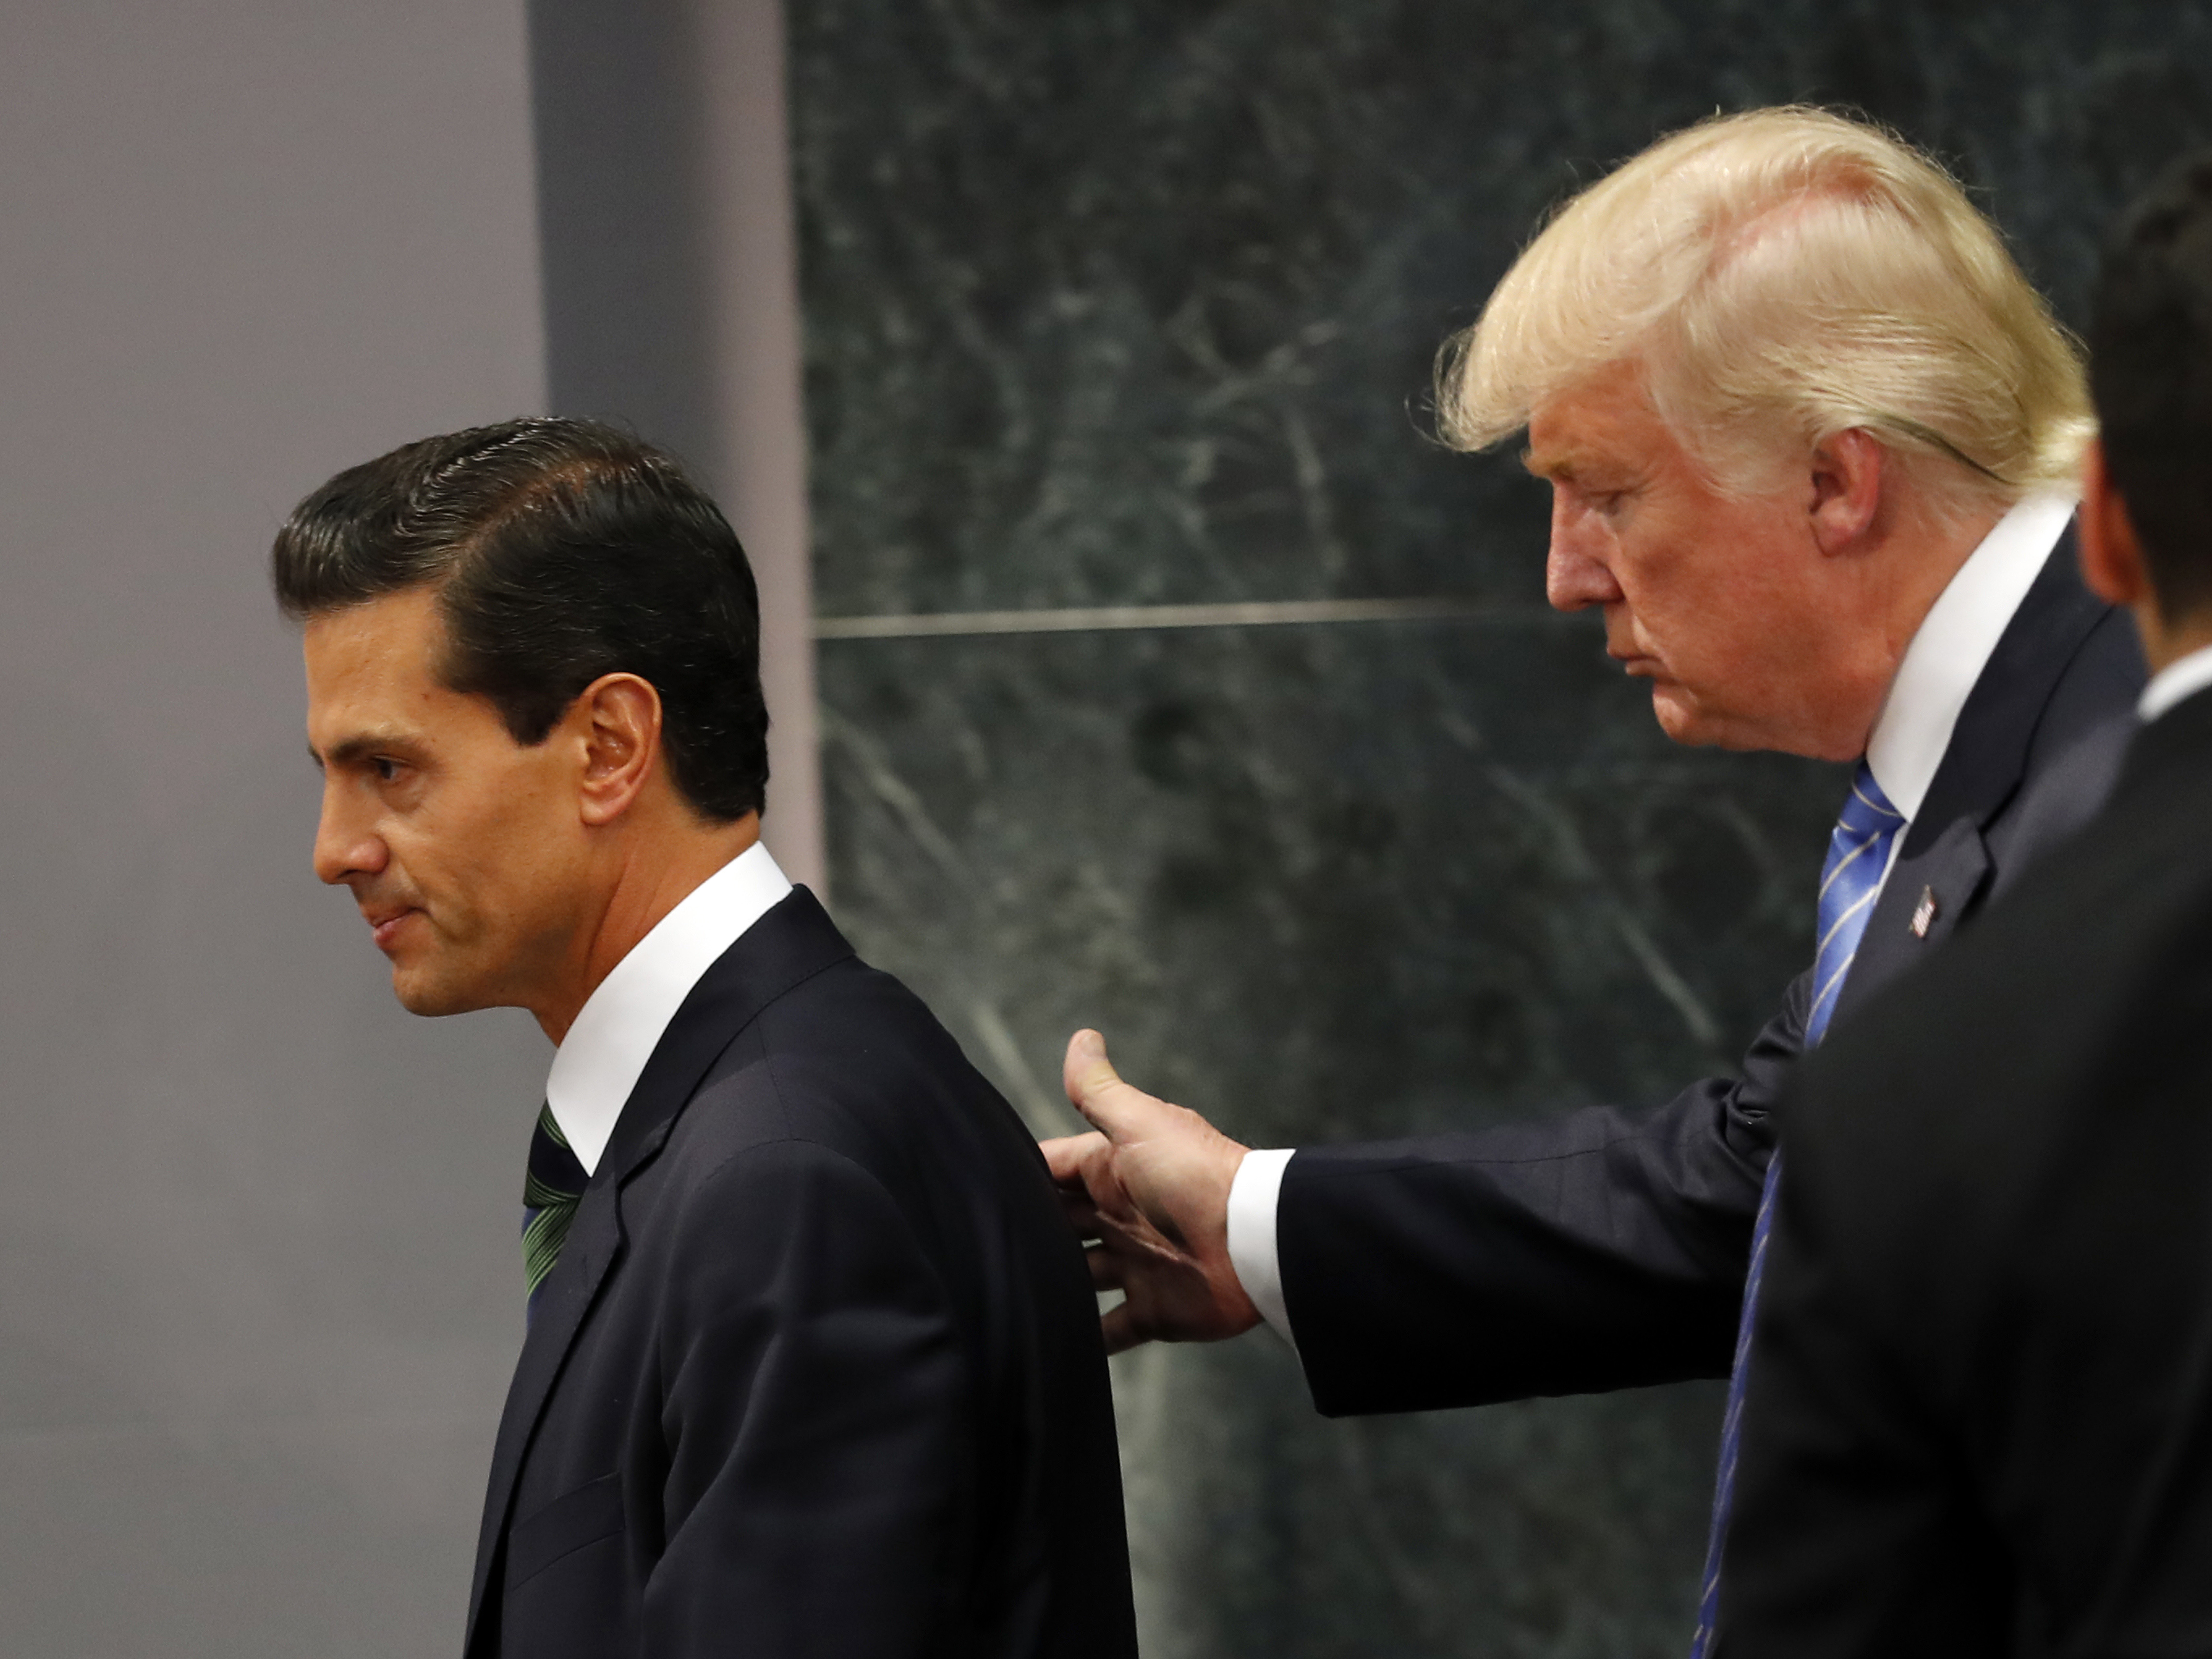 Republican presidential nominee Donald Trump walks with Mexico President Enrique Peña Nieto at the end of their joint statement at Los Pinos, the presidential residence, in Mexico City. (Photo by Dario Lopez-Mills/Associated Press)